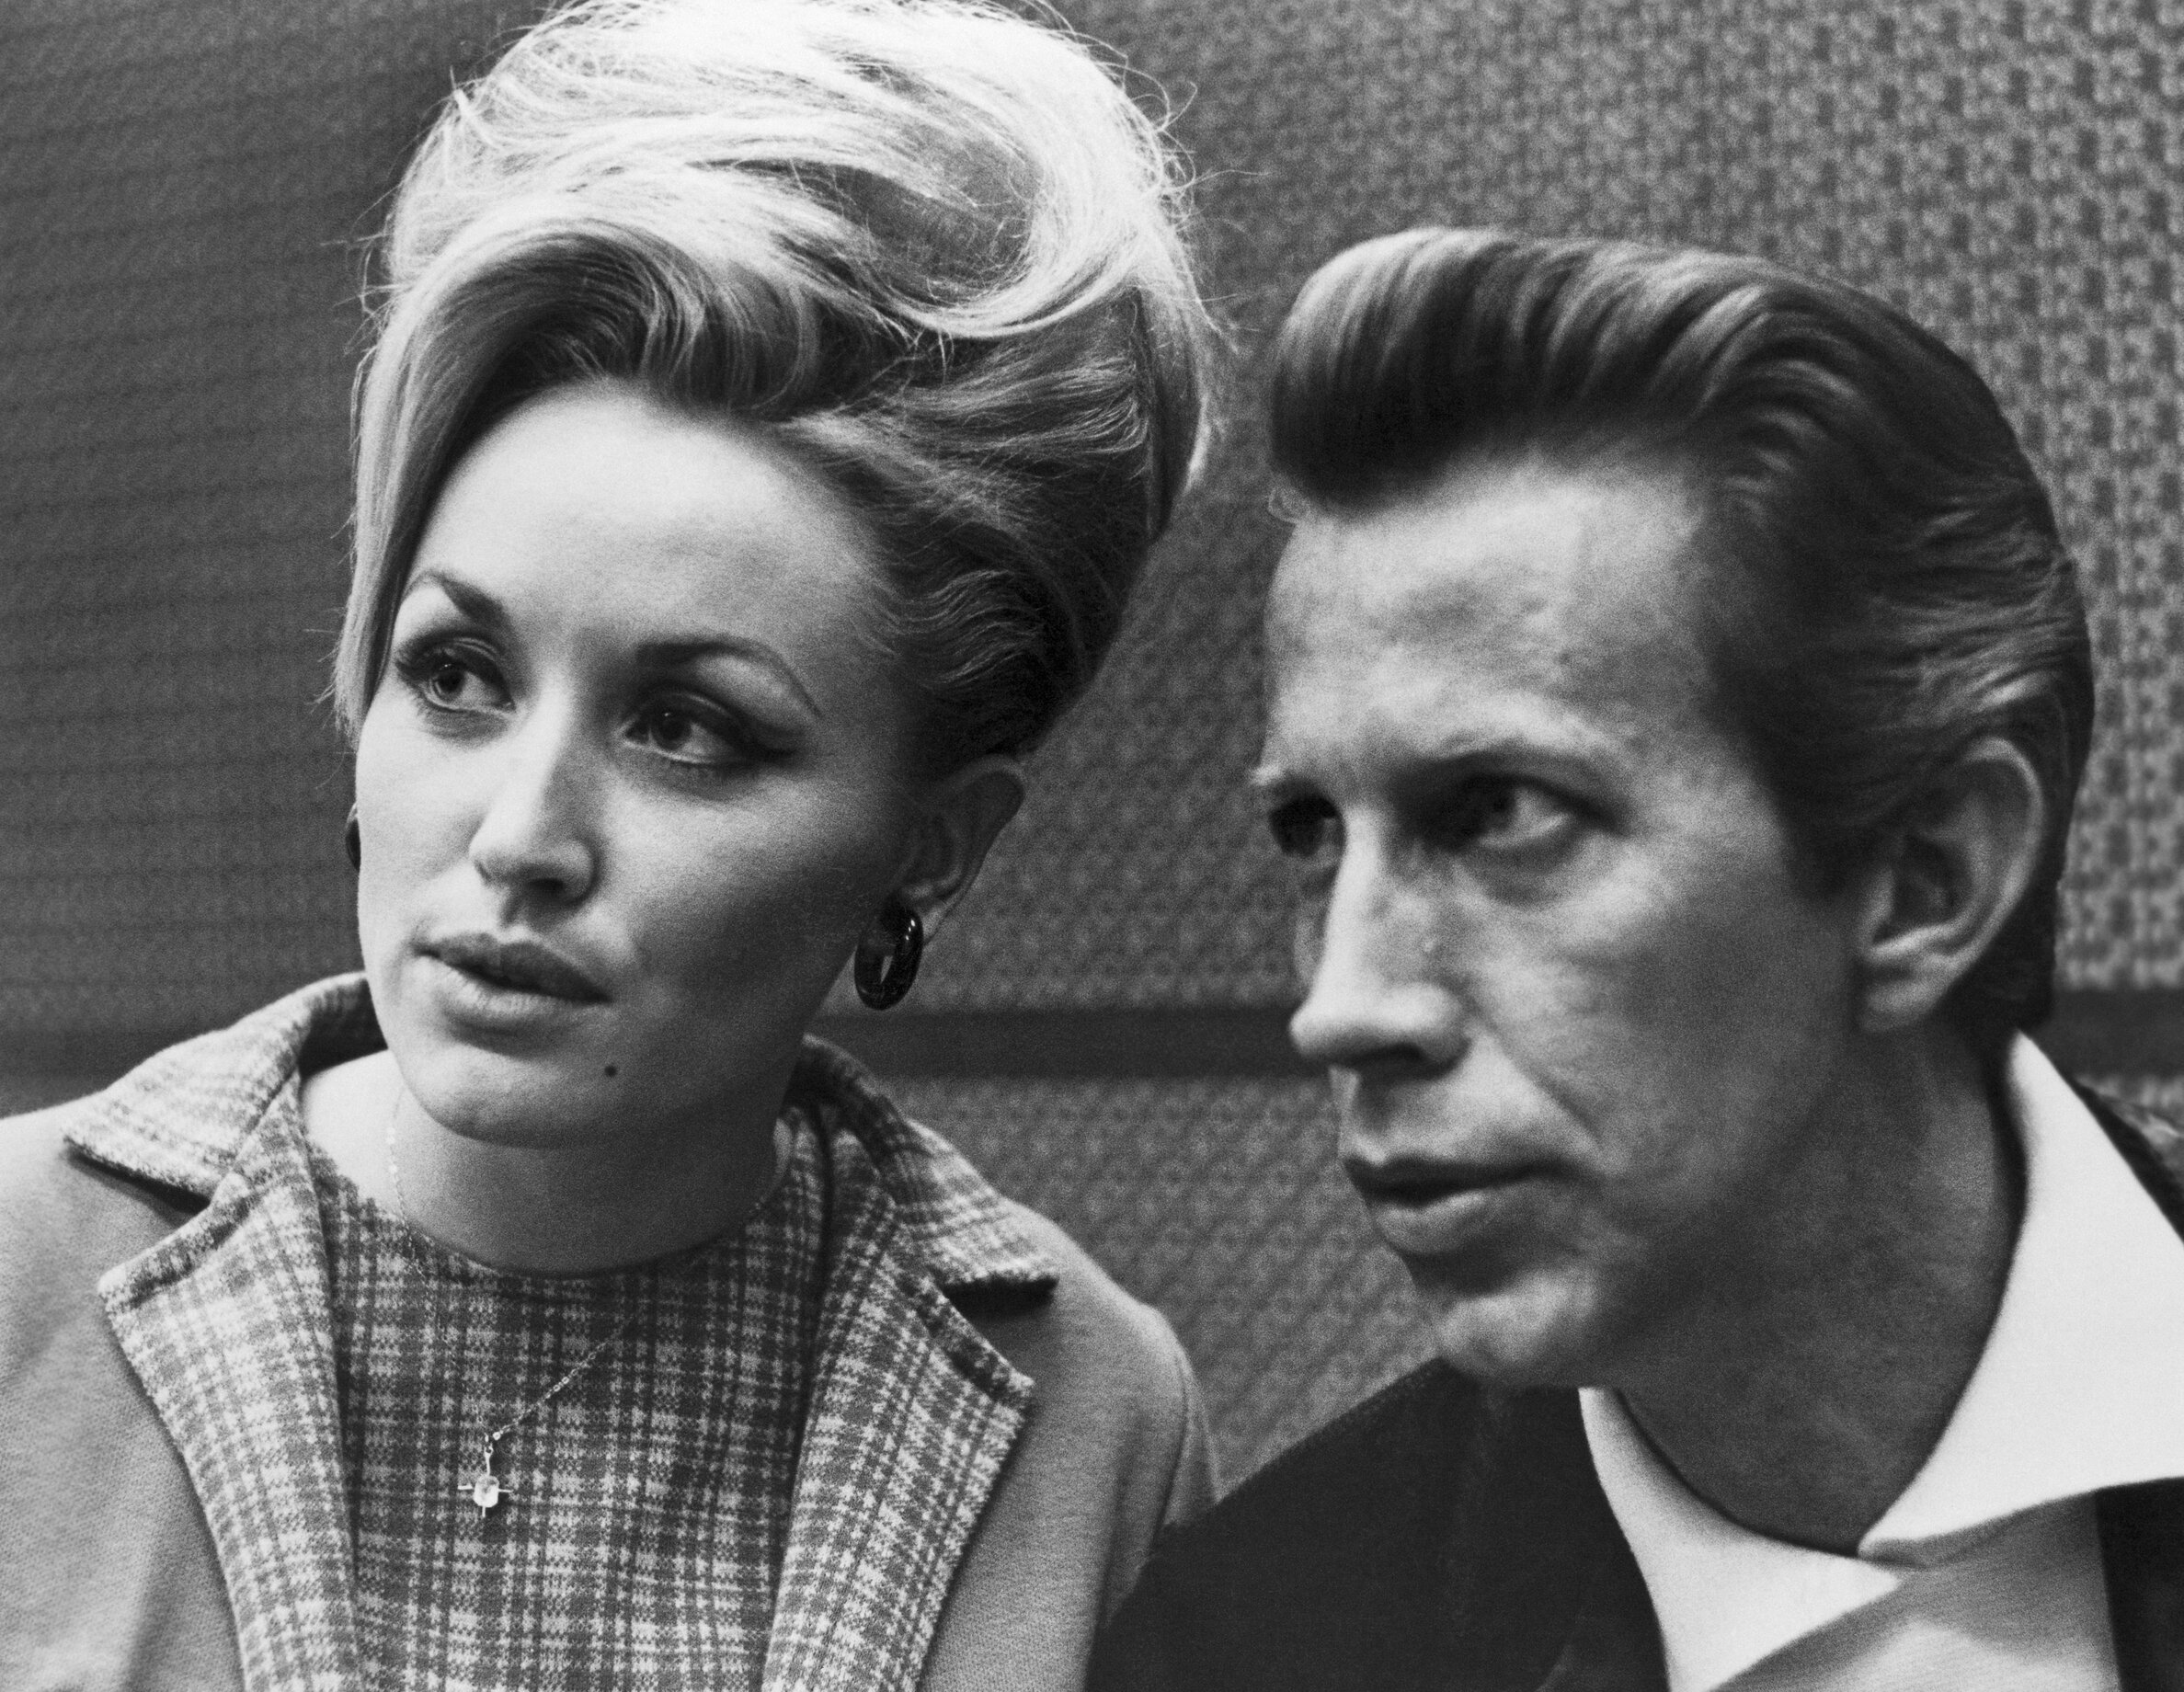 Dolly Parton and Porter Wagoner close-up in black and white.